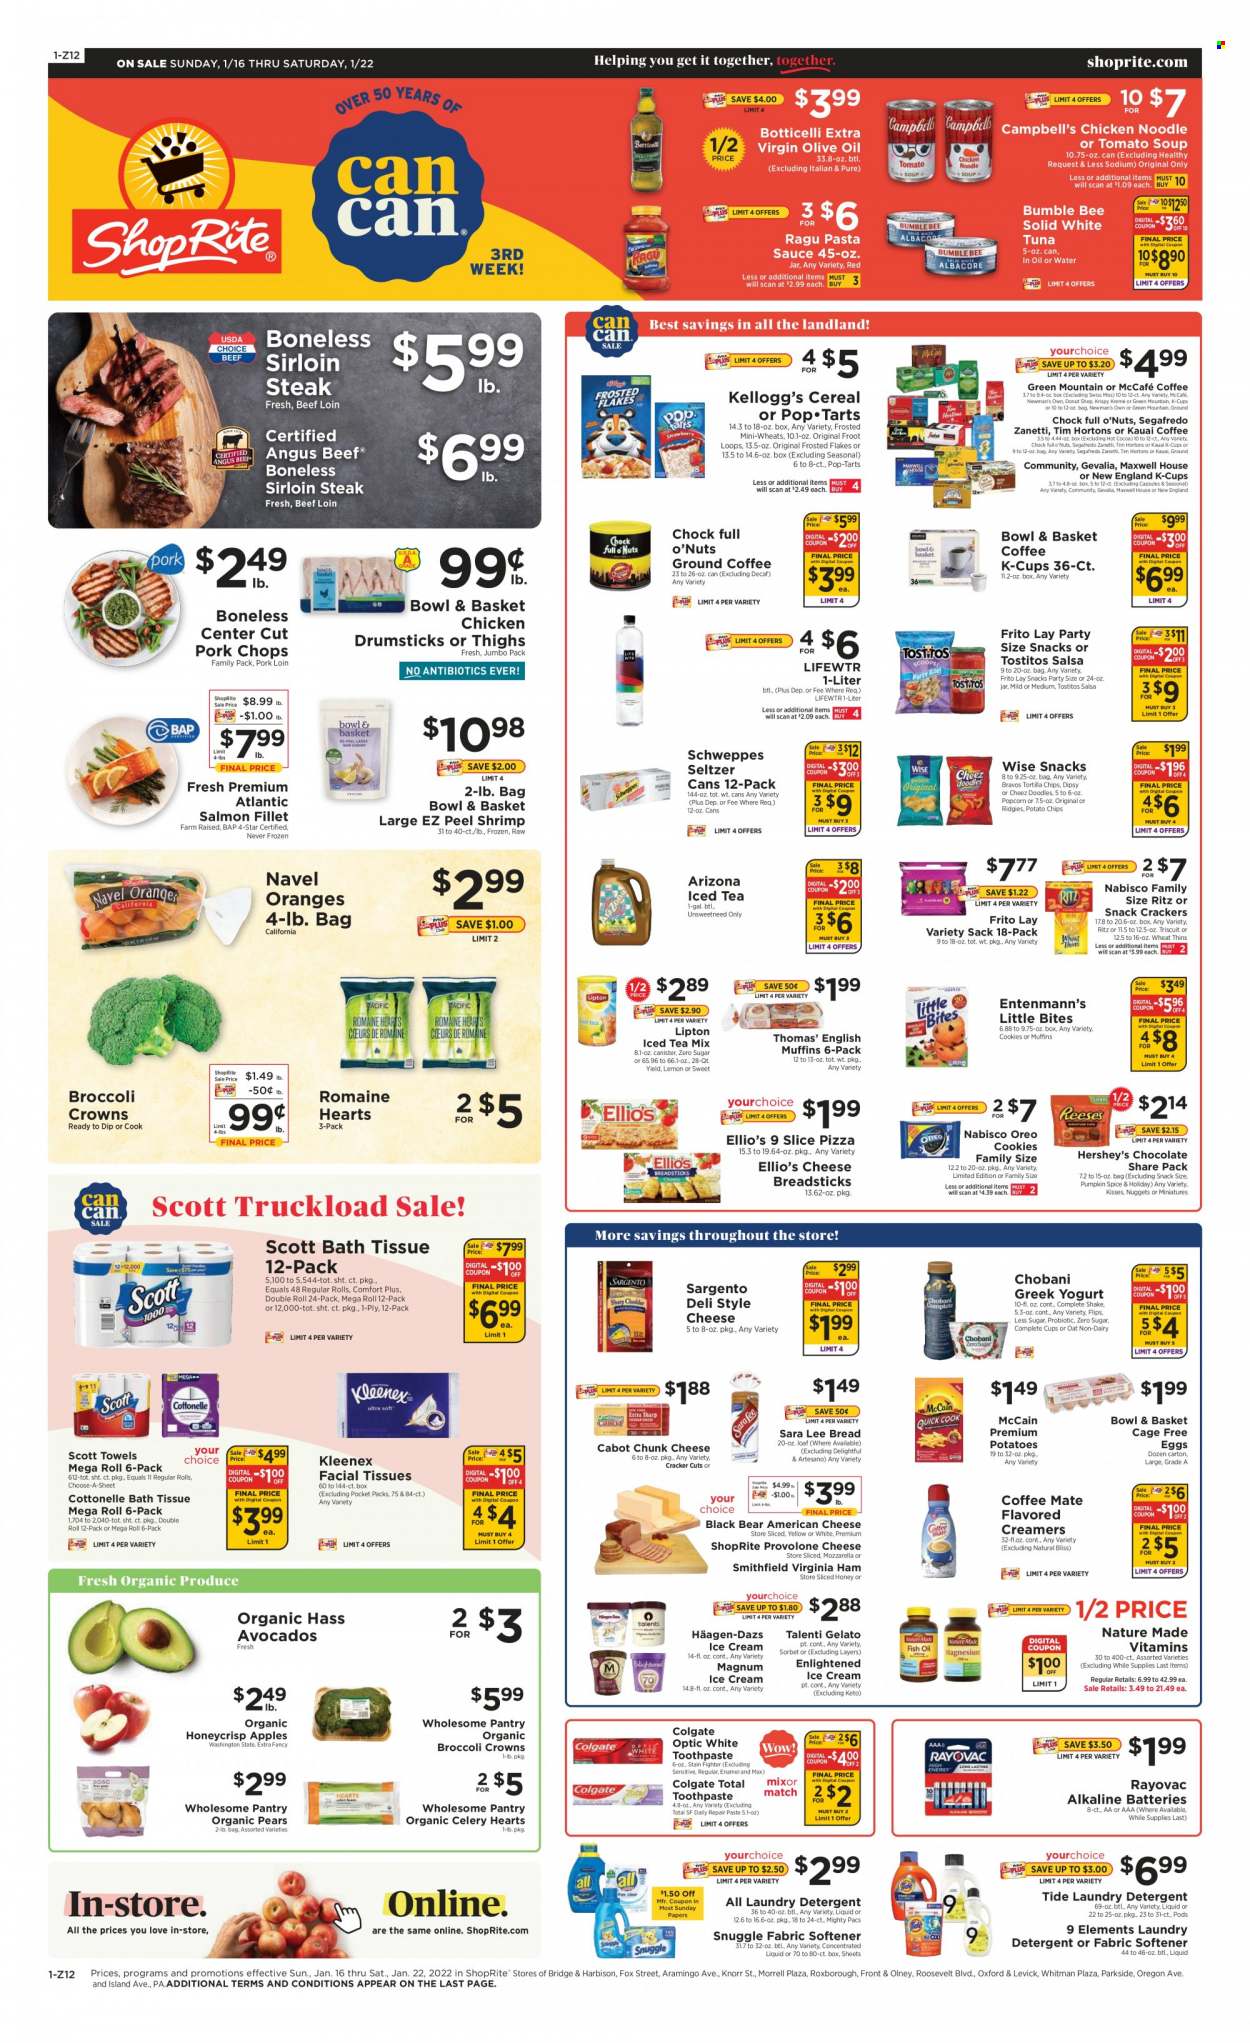 ShopRite Flyer - 01/16/2022 - 01/22/2022 - Sales products - bread, Sara Lee, Bowl & Basket, Entenmann's, celery, sleeved celery, apples, avocado, pears, orange, salmon, salmon fillet, tuna, shrimps, Campbell's, tomato soup, pizza, pasta sauce, soup, nuggets, Bumble Bee, Knorr, sauce, noodles, ragú pasta, ham, virginia ham, american cheese, chunk cheese, Provolone, Sargento, greek yoghurt, Oreo, yoghurt, Chobani, Swiss Miss, shakes, eggs, cage free eggs, dip, ice cream, Hershey's, Häagen-Dazs, Talenti Gelato, Enlightened lce Cream, gelato, McCain, cookies, crackers, Kellogg's, Pop-Tarts, Little Bites, RITZ, bread sticks, tortilla chips, potato chips, Thins, popcorn, Tostitos, cereals, Frosted Flakes, spice, salsa, ragu, extra virgin olive oil, olive oil, nuts, Schweppes, Lipton, ice tea, AriZona, seltzer water, Lifewtr, hot cocoa, Maxwell House, coffee capsules, McCafe, K-Cups, Gevalia, Segafredo, Green Mountain, chicken drumsticks, chicken meat, beef meat, beef sirloin, steak, sirloin steak, pork chops, pork loin, pork meat, bath tissue, Cottonelle, Kleenex, Scott, detergent, Snuggle, Tide, fabric softener, laundry detergent, Colgate, toothpaste, facial tissues, battery, alkaline batteries, Nature Made, navel oranges. Page 1.